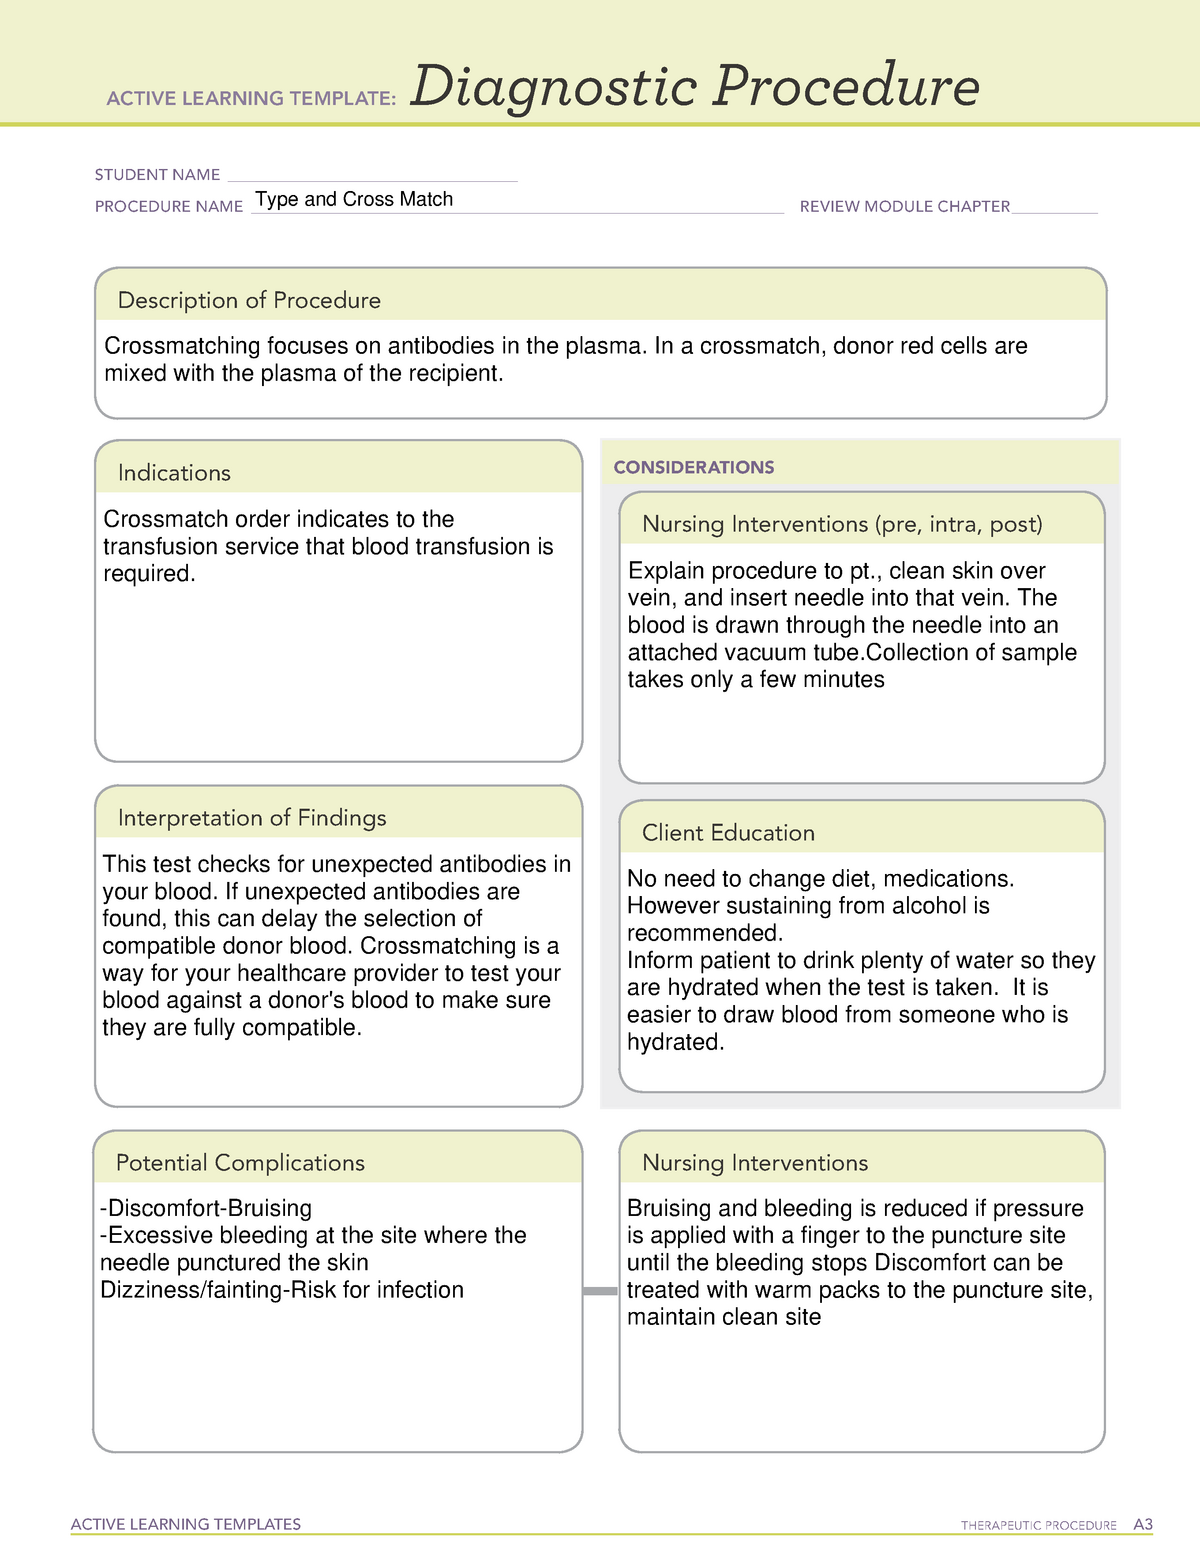 ATI Type and Cross Match Diagnostic Procedure Sheet ACTIVE LEARNING